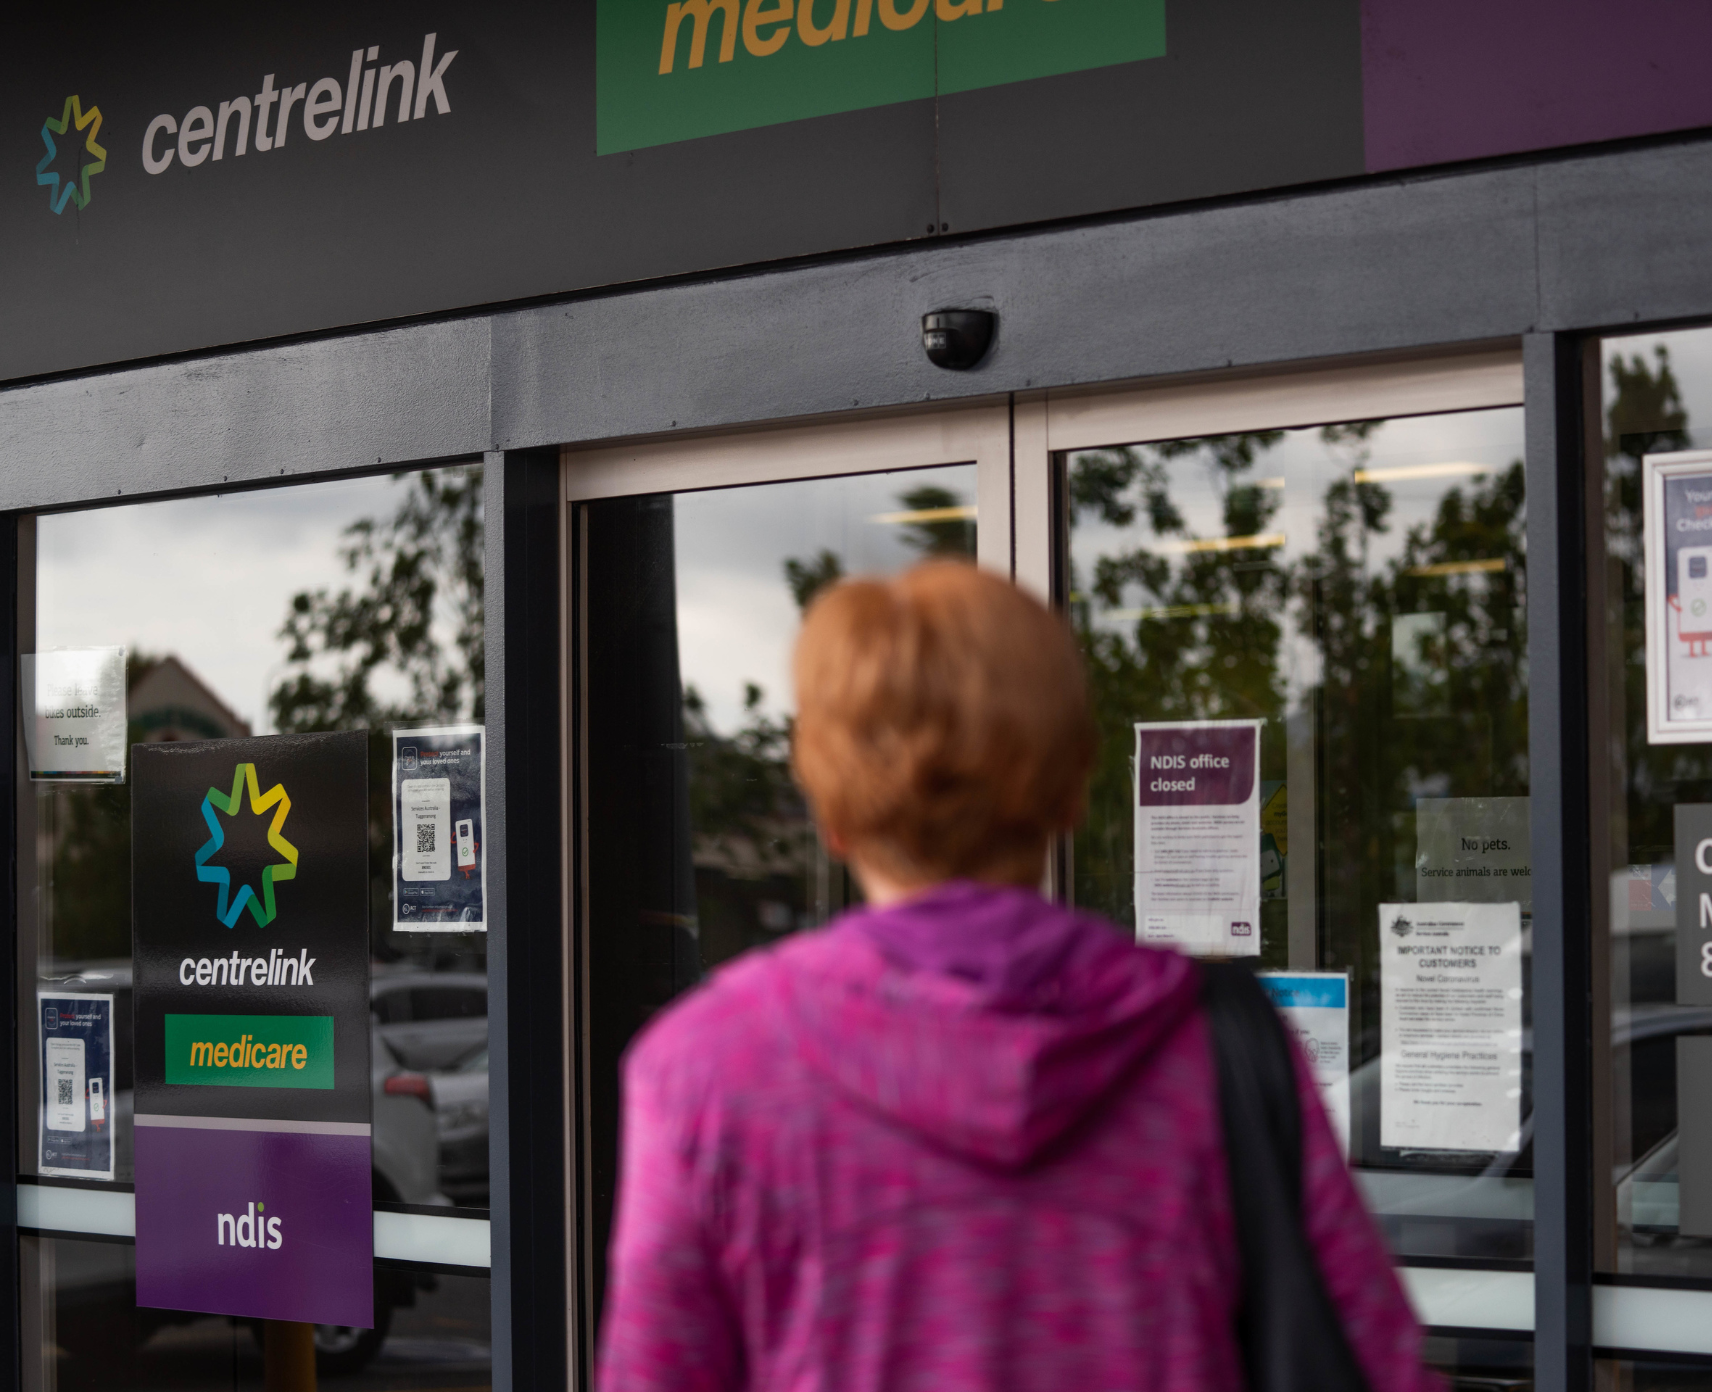 A woman with short red hair is pictured from behind walking towards the entrance of a Centrelink office.